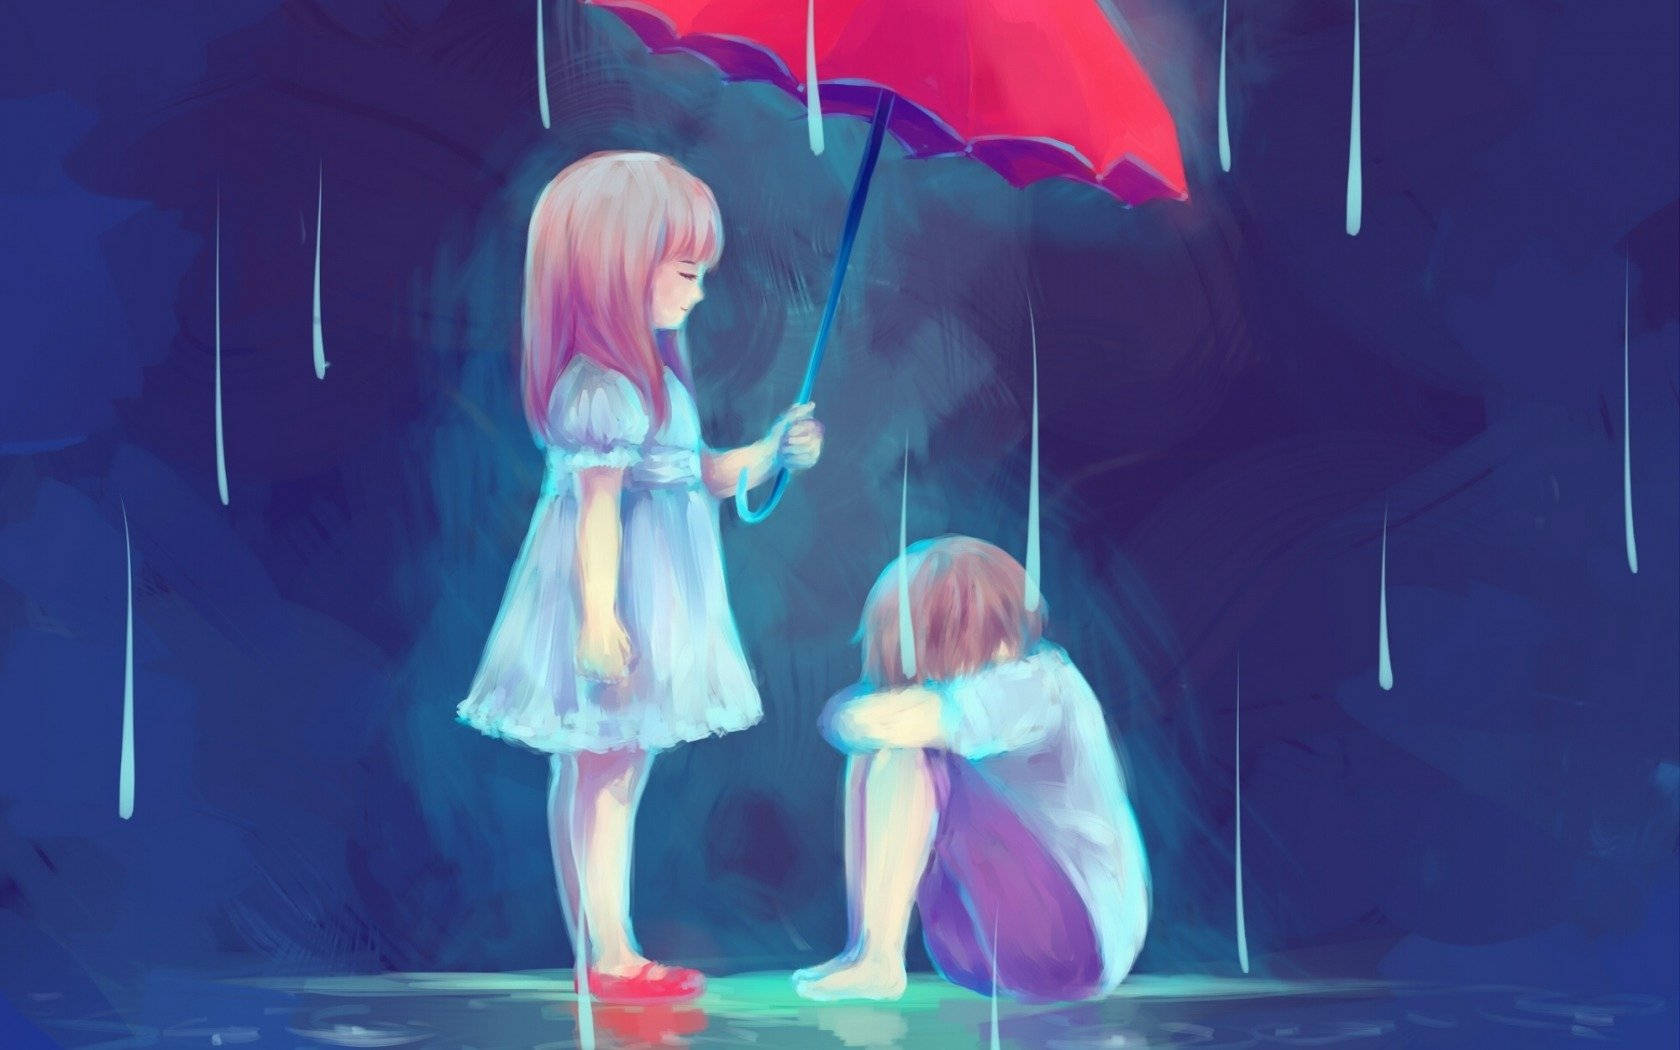 A Girl And Boy Standing In The Rain With An Umbrella